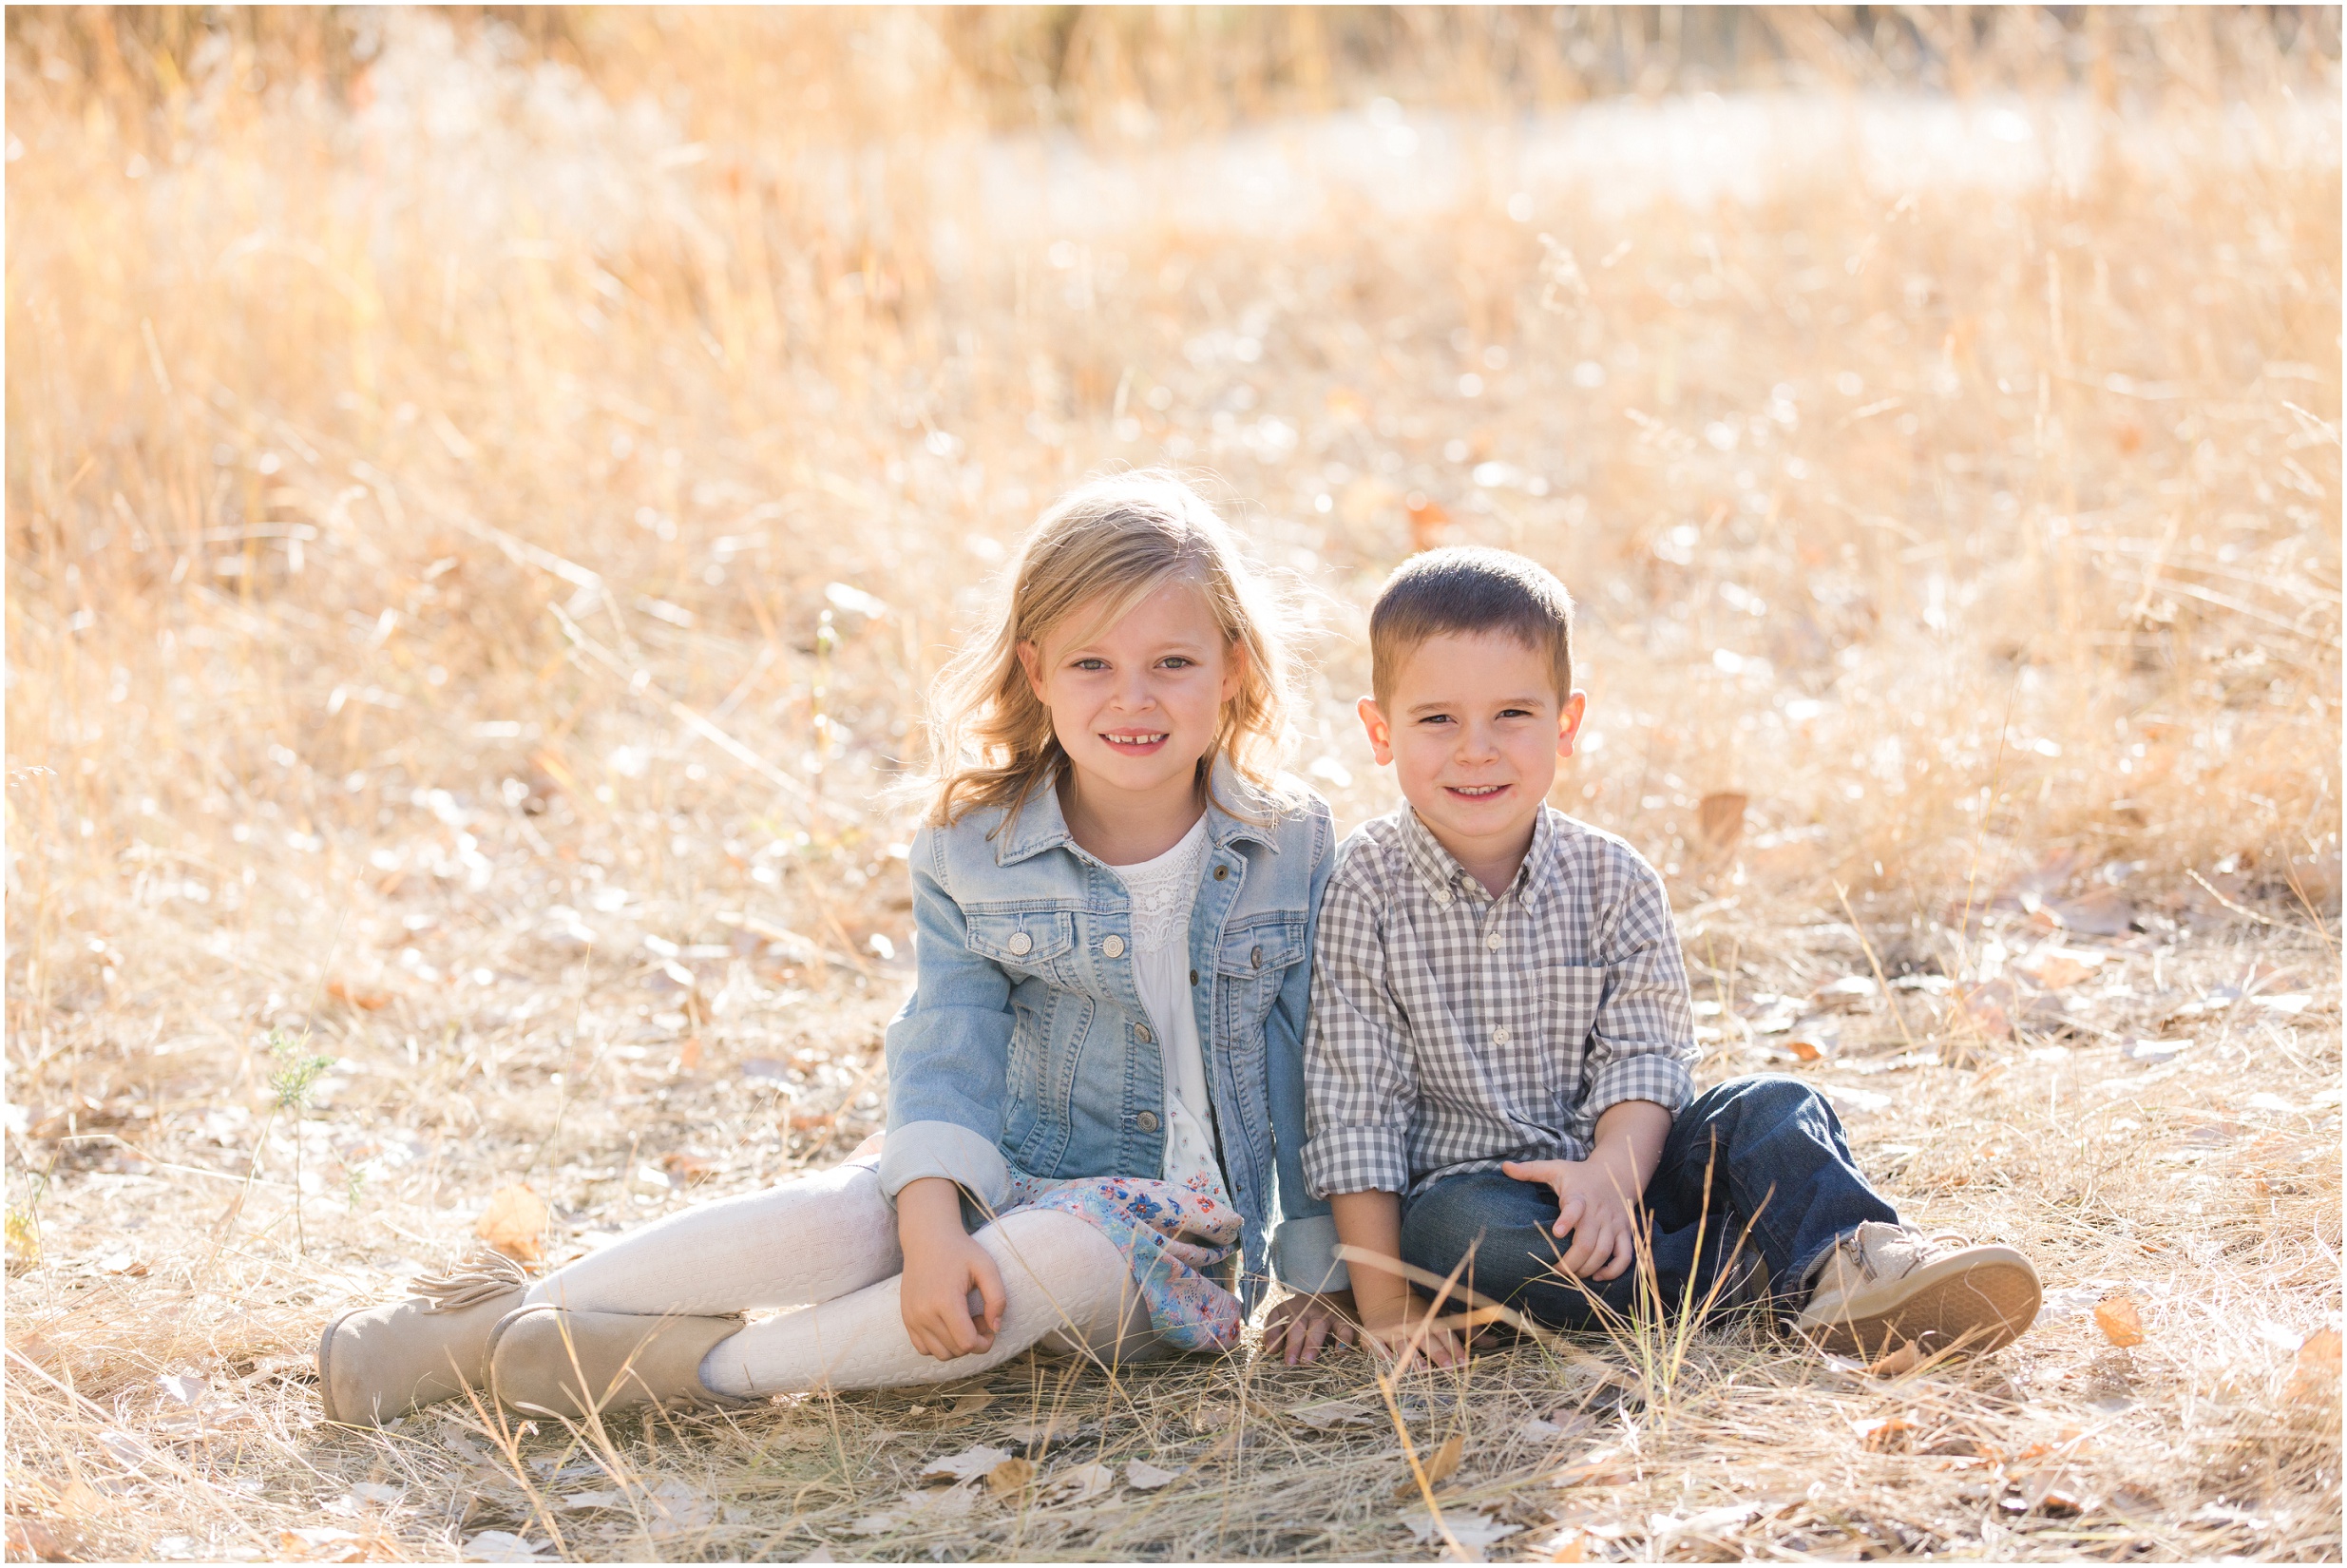 fall family photos, medicine hat family photographer, nc photography, what to wear for family photos